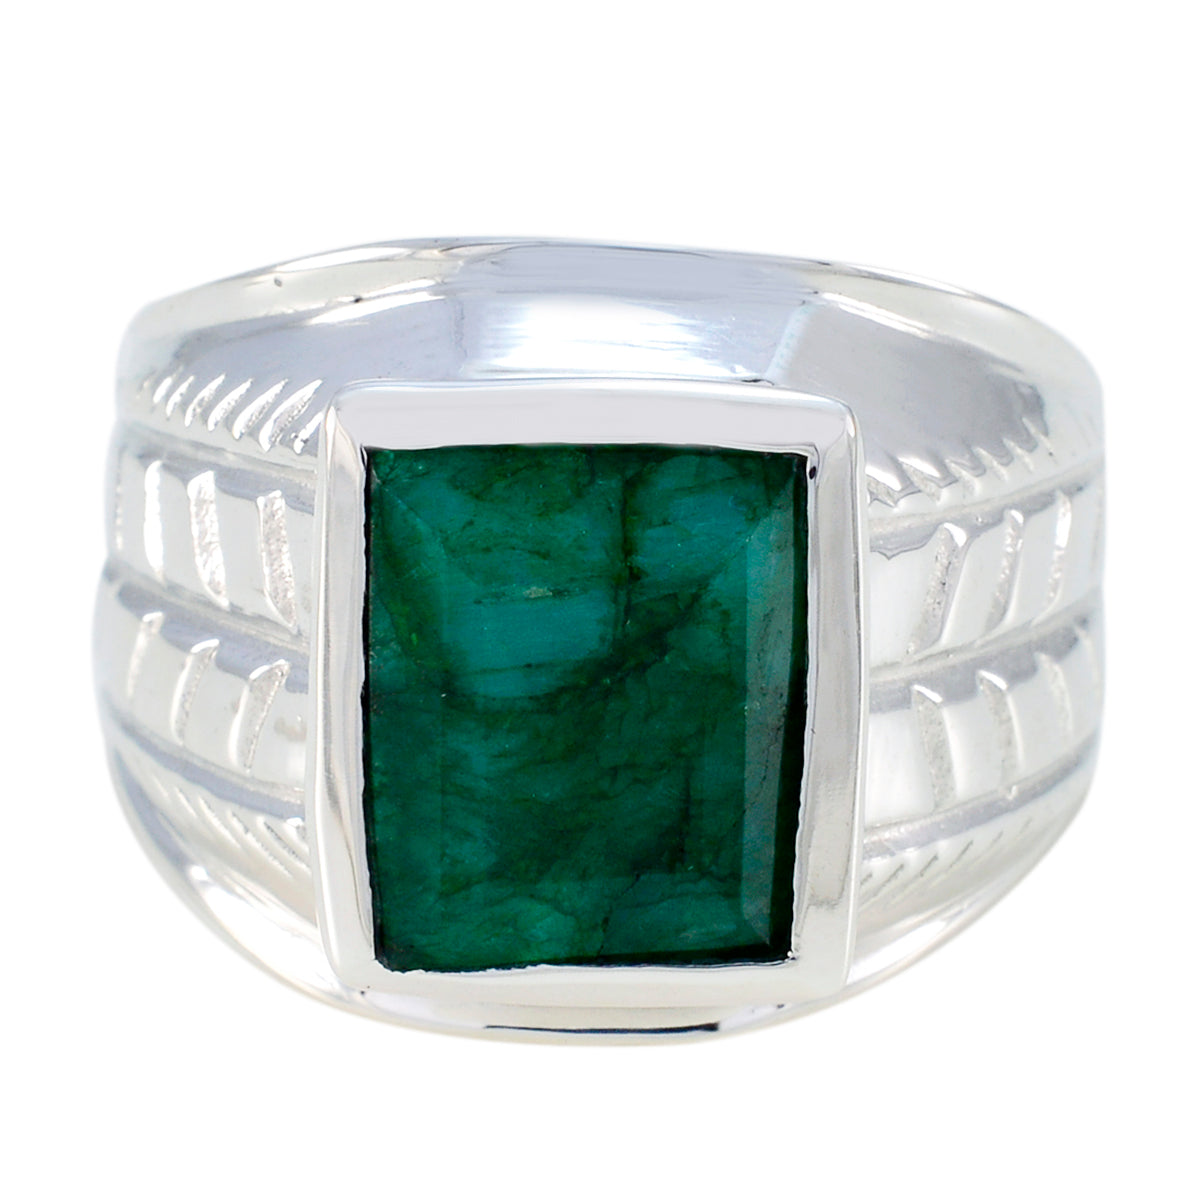 Riyo Supply Gem Indianemerald Sterling Silver Rings Jewelry Images